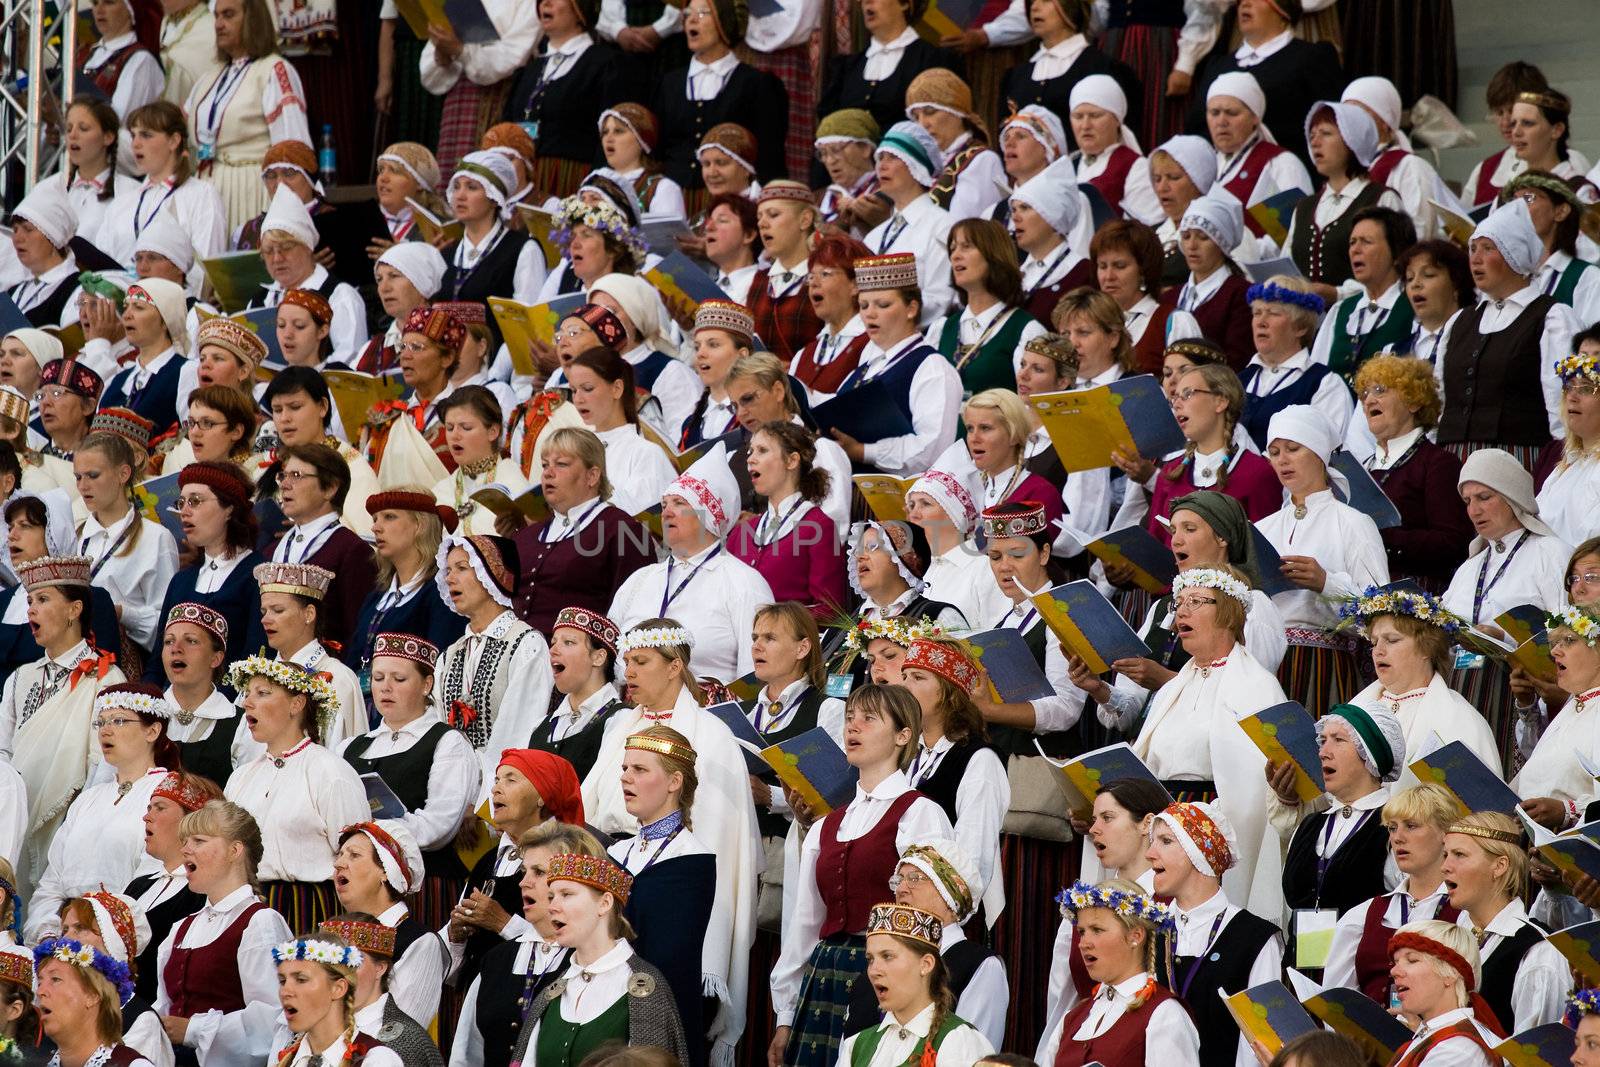 Grand choir at Song festival opening concert in Riga by ints